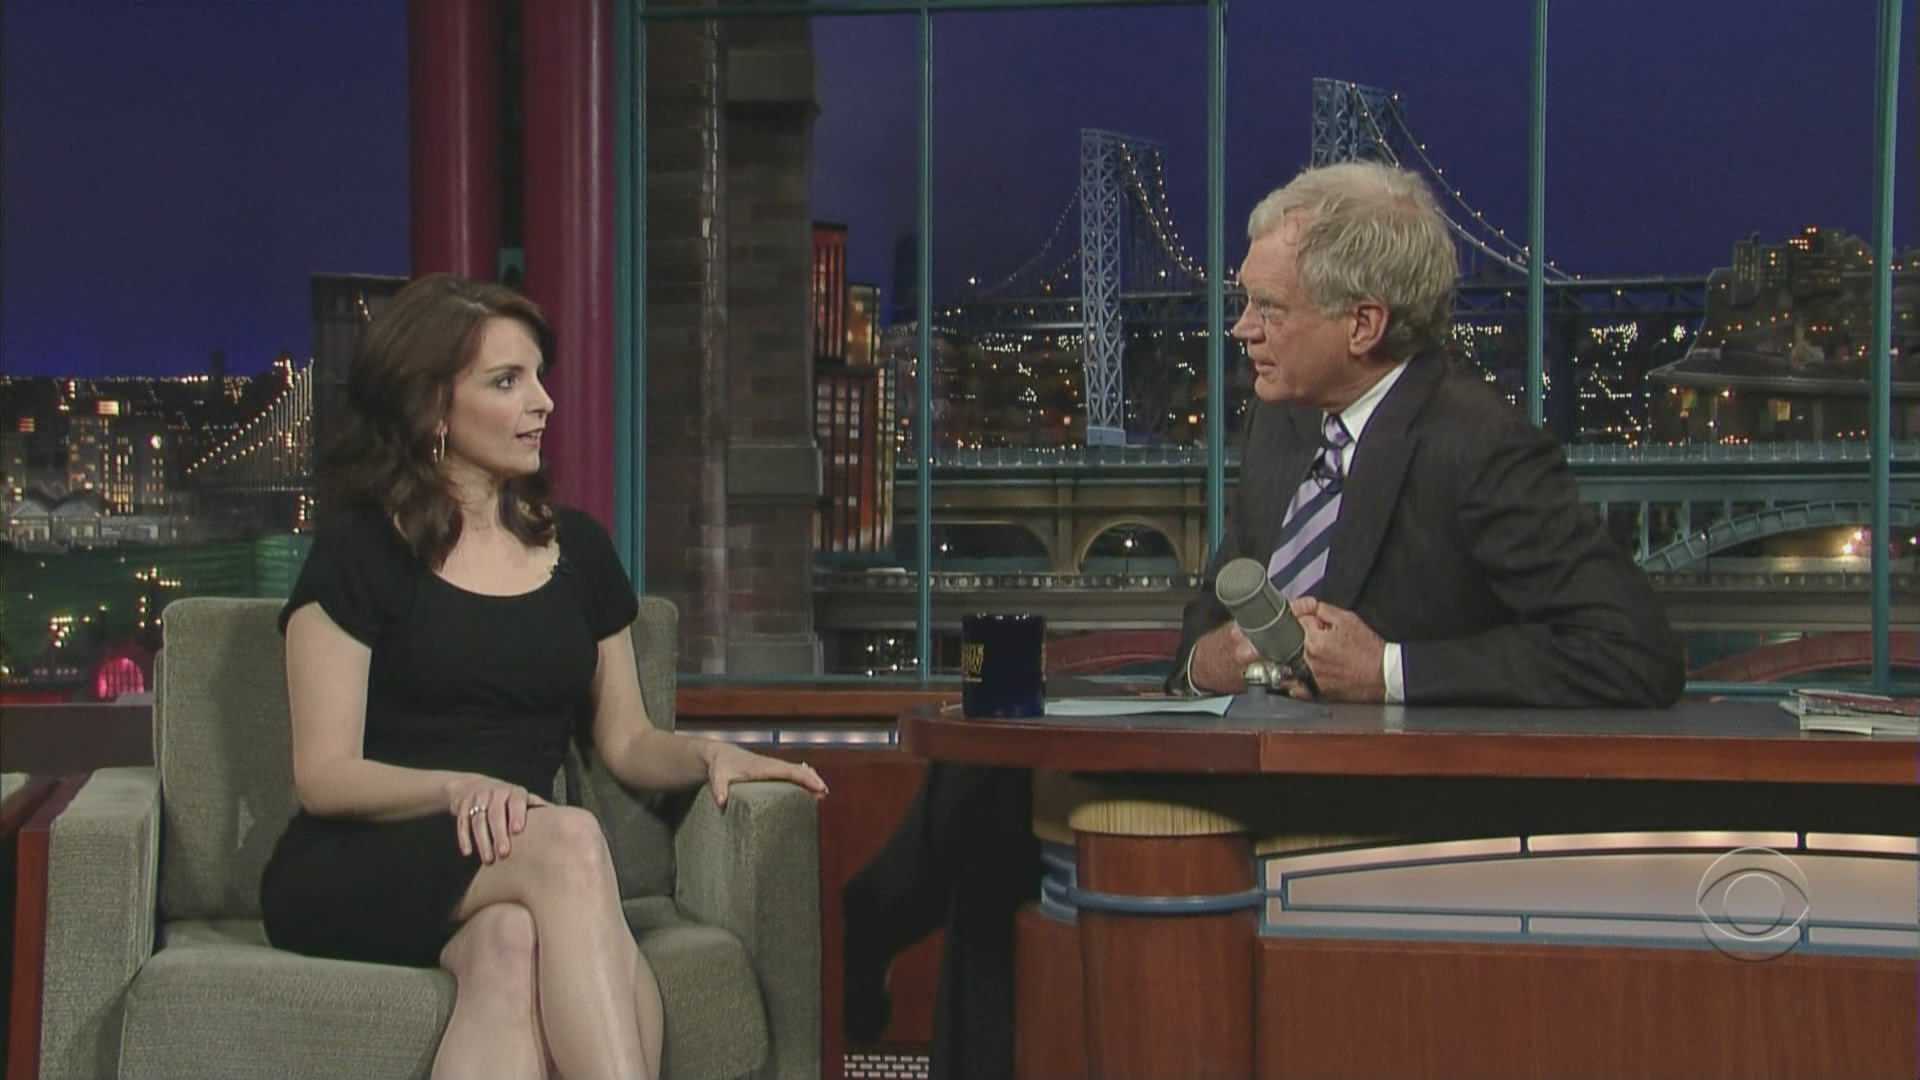 Permalink to Tina Fey - The Late Show with David Letterman (2008-04-24). 